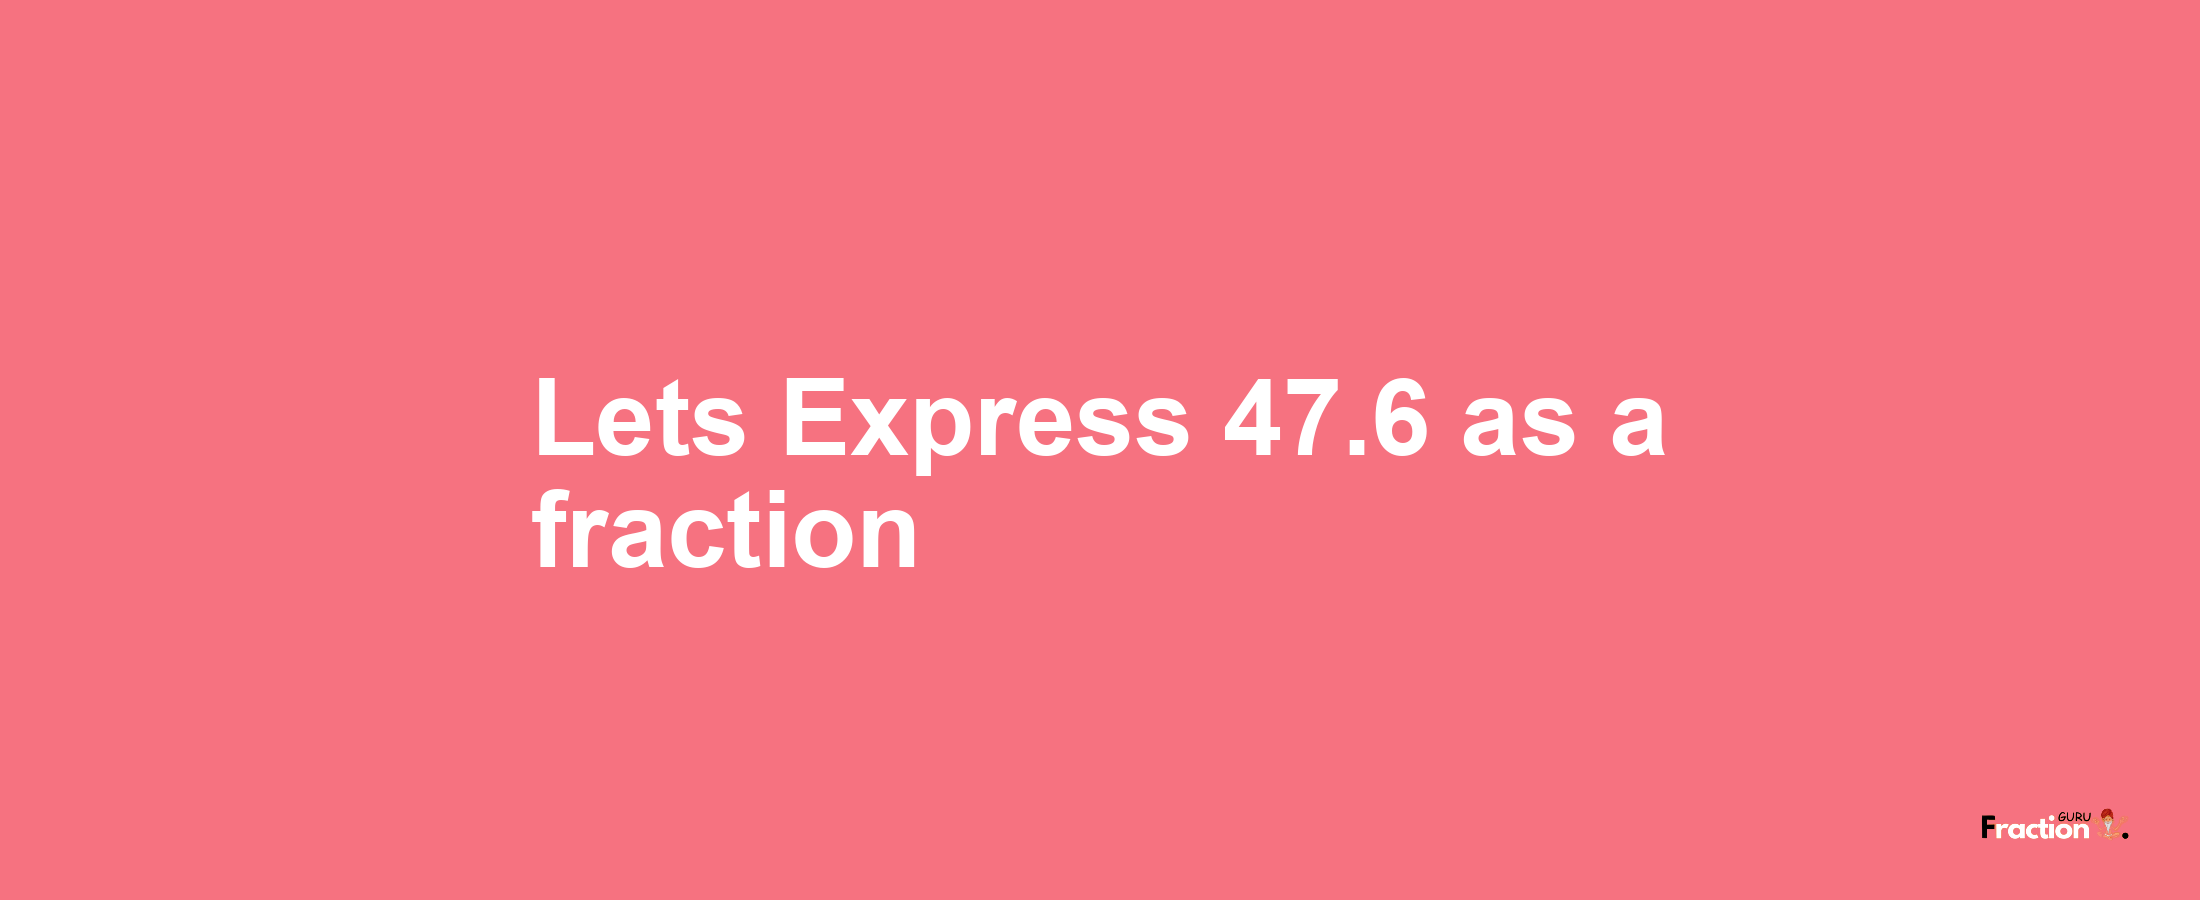 Lets Express 47.6 as afraction